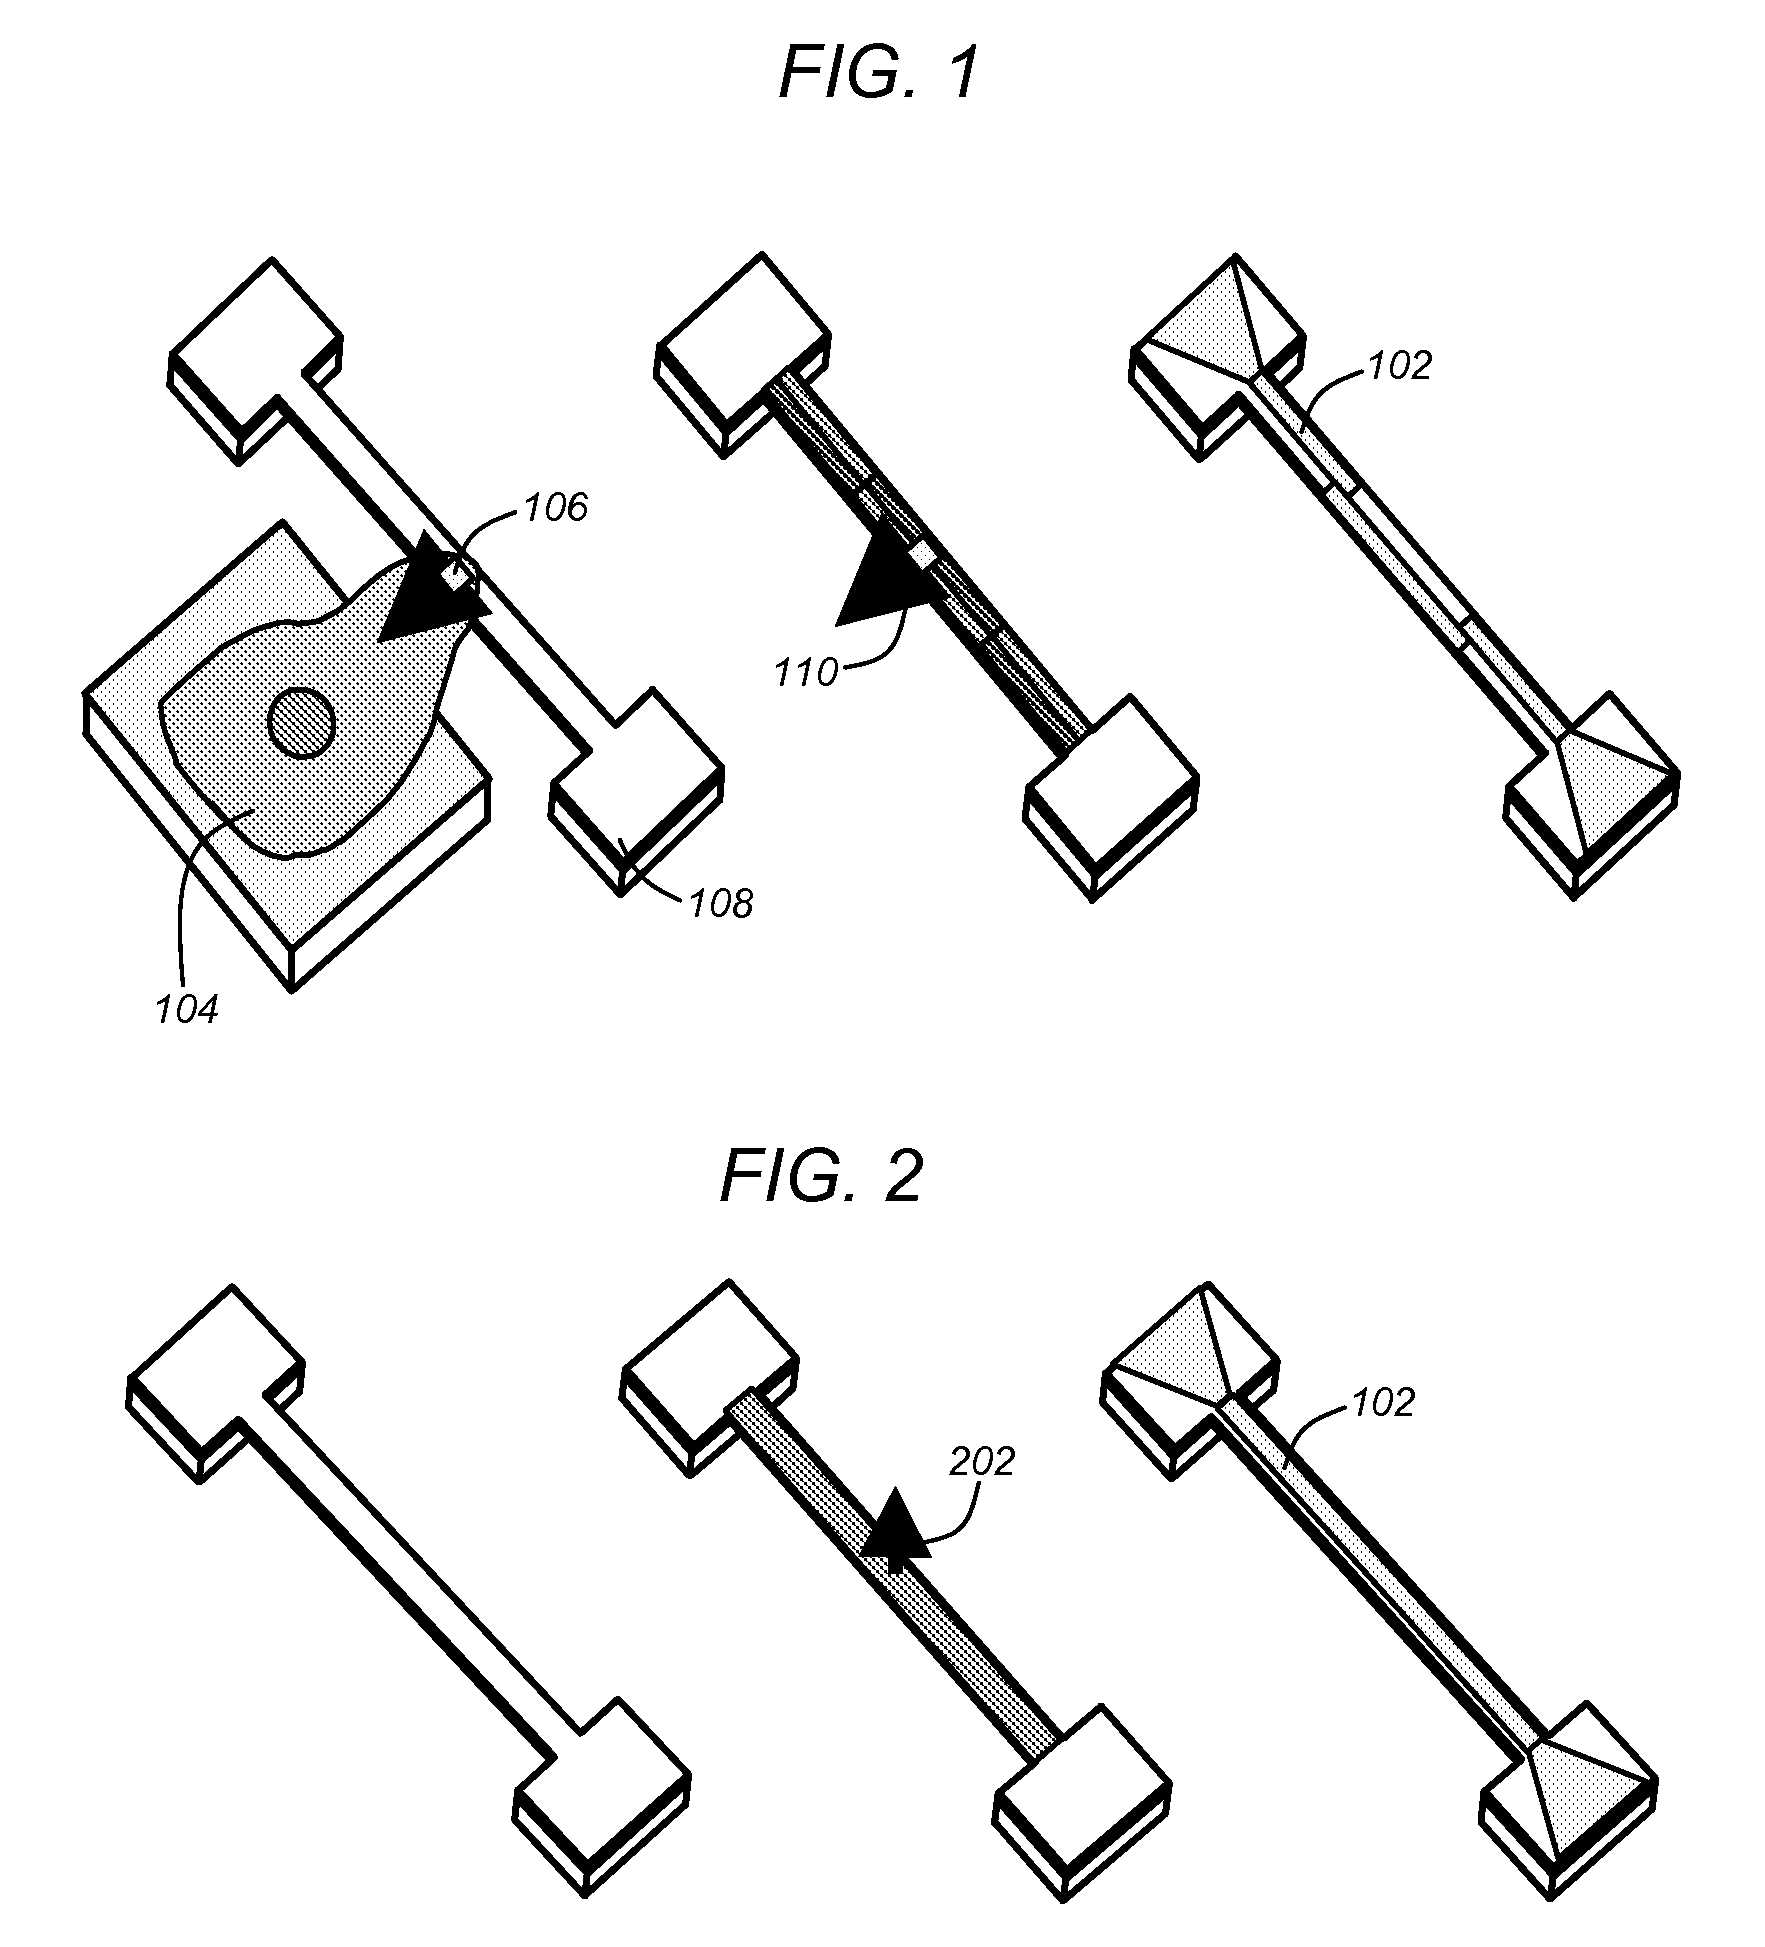 Polymer nems for cell physiology and microfabricated cell positioning system for micro-biocalorimeter